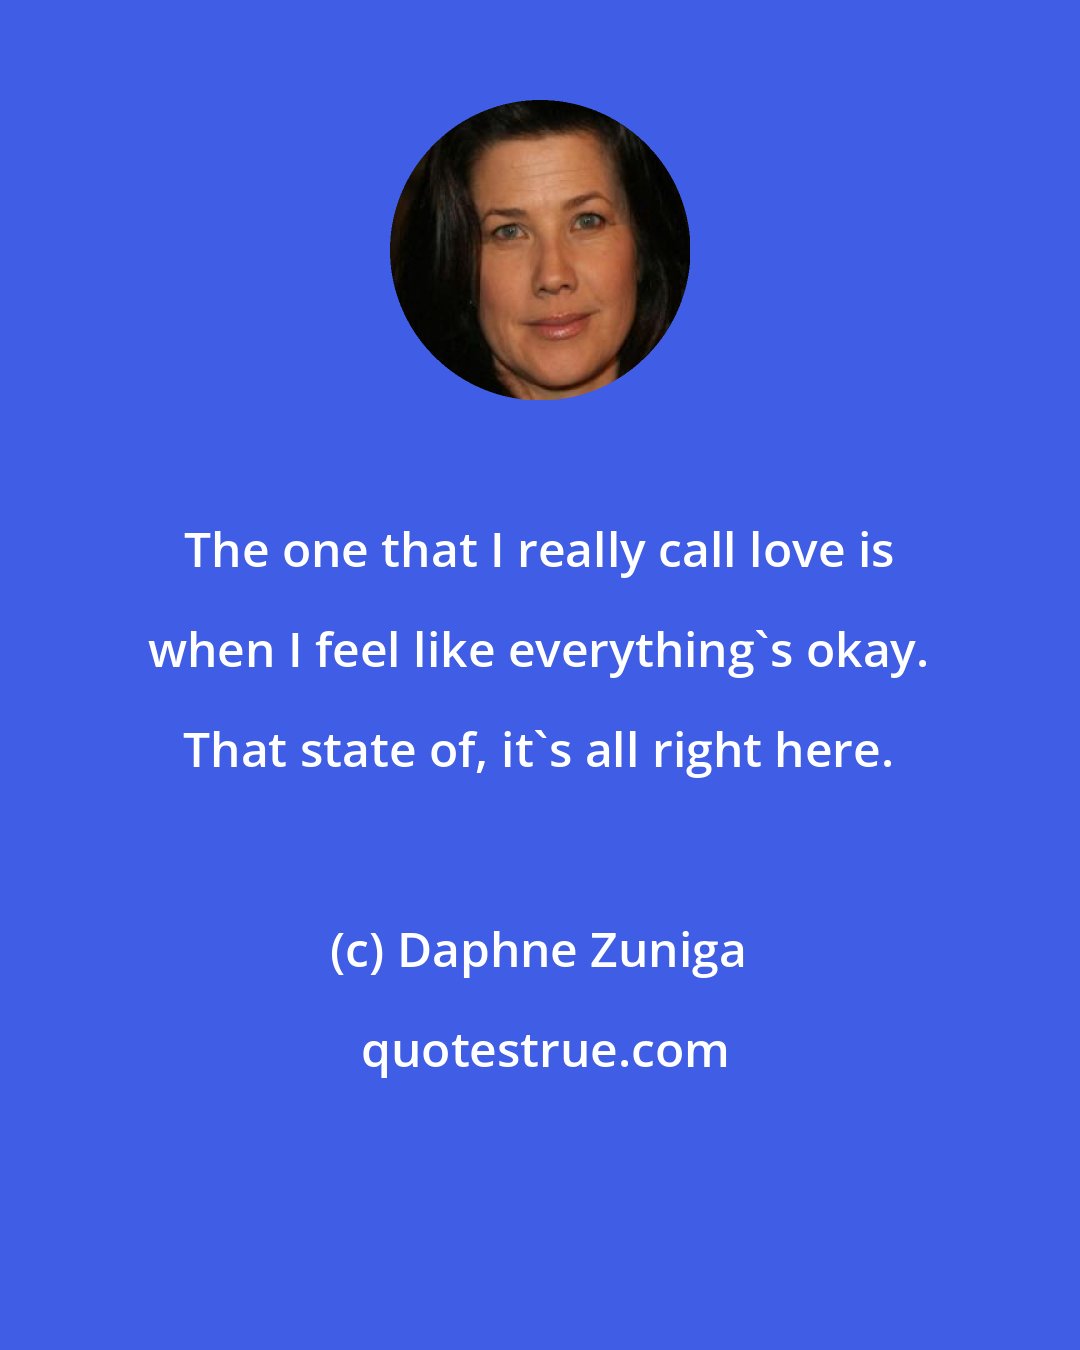 Daphne Zuniga: The one that I really call love is when I feel like everything's okay. That state of, it's all right here.